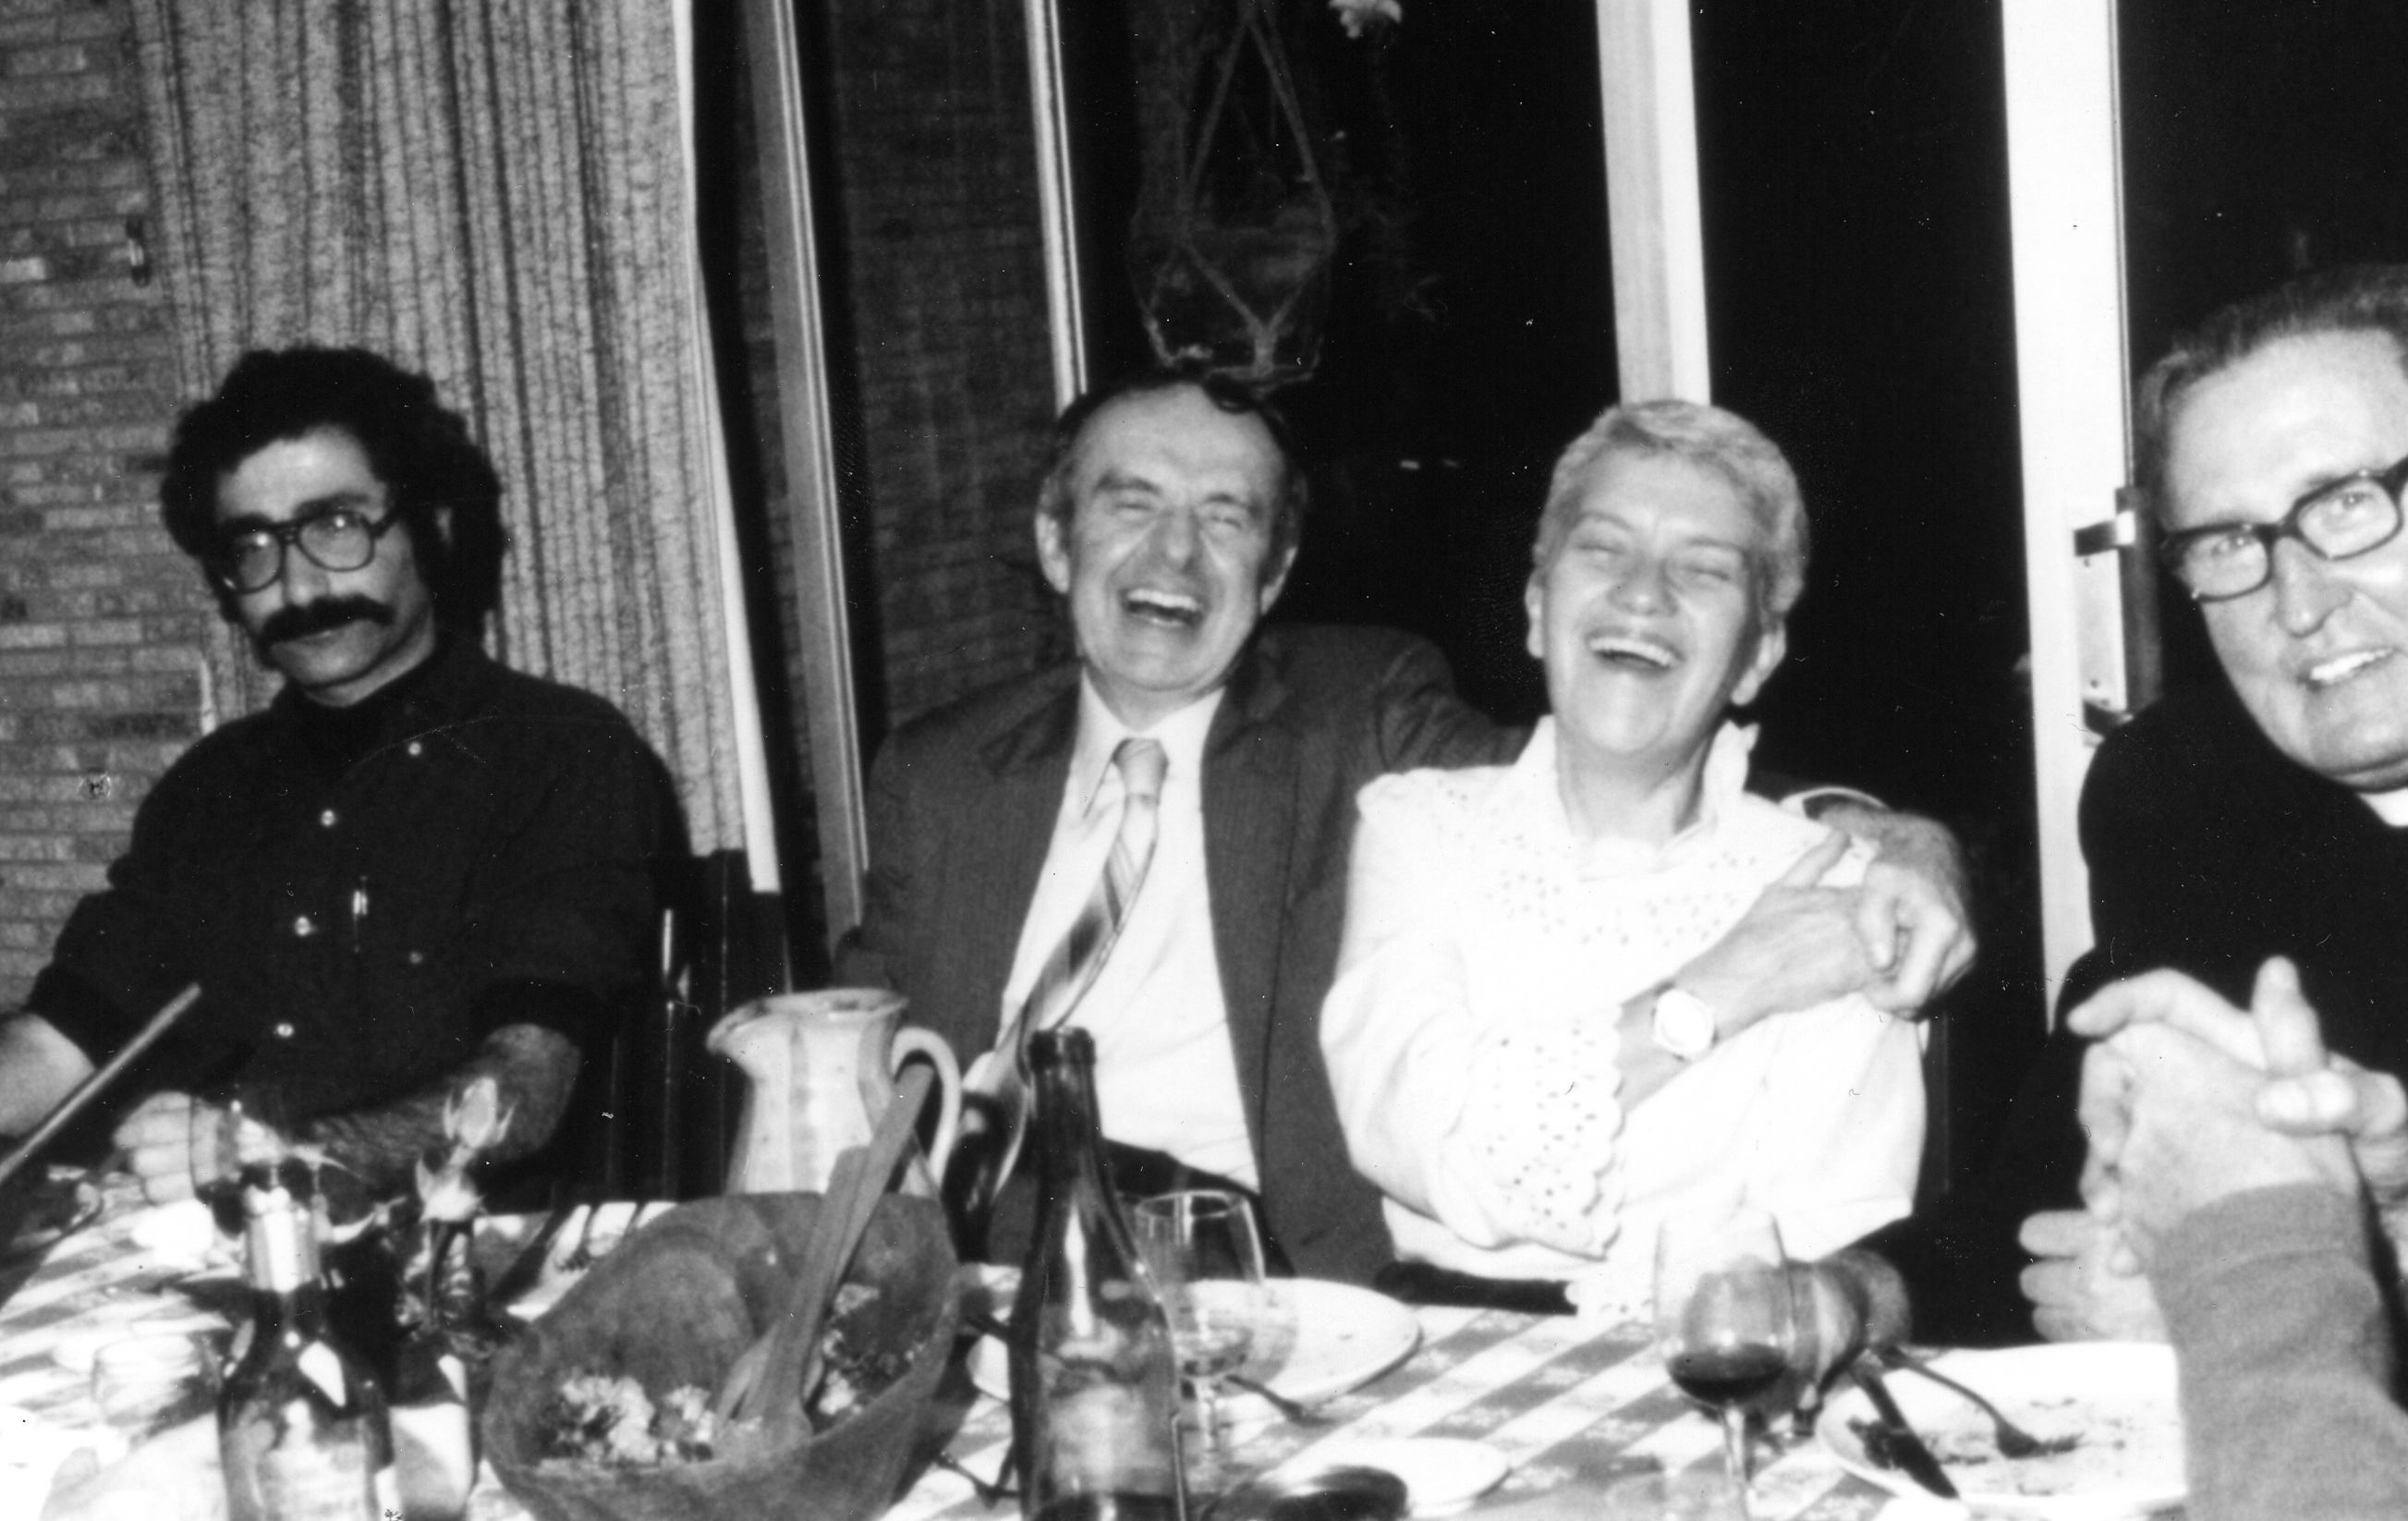 (L-R): Jay Frogel, Allan Sandage, Vera Rubin, and Martin McCarthy share a meal. Image information: Frogel Jay D1, AIP Emilio Segrè Visual Archives, Rubin Collection